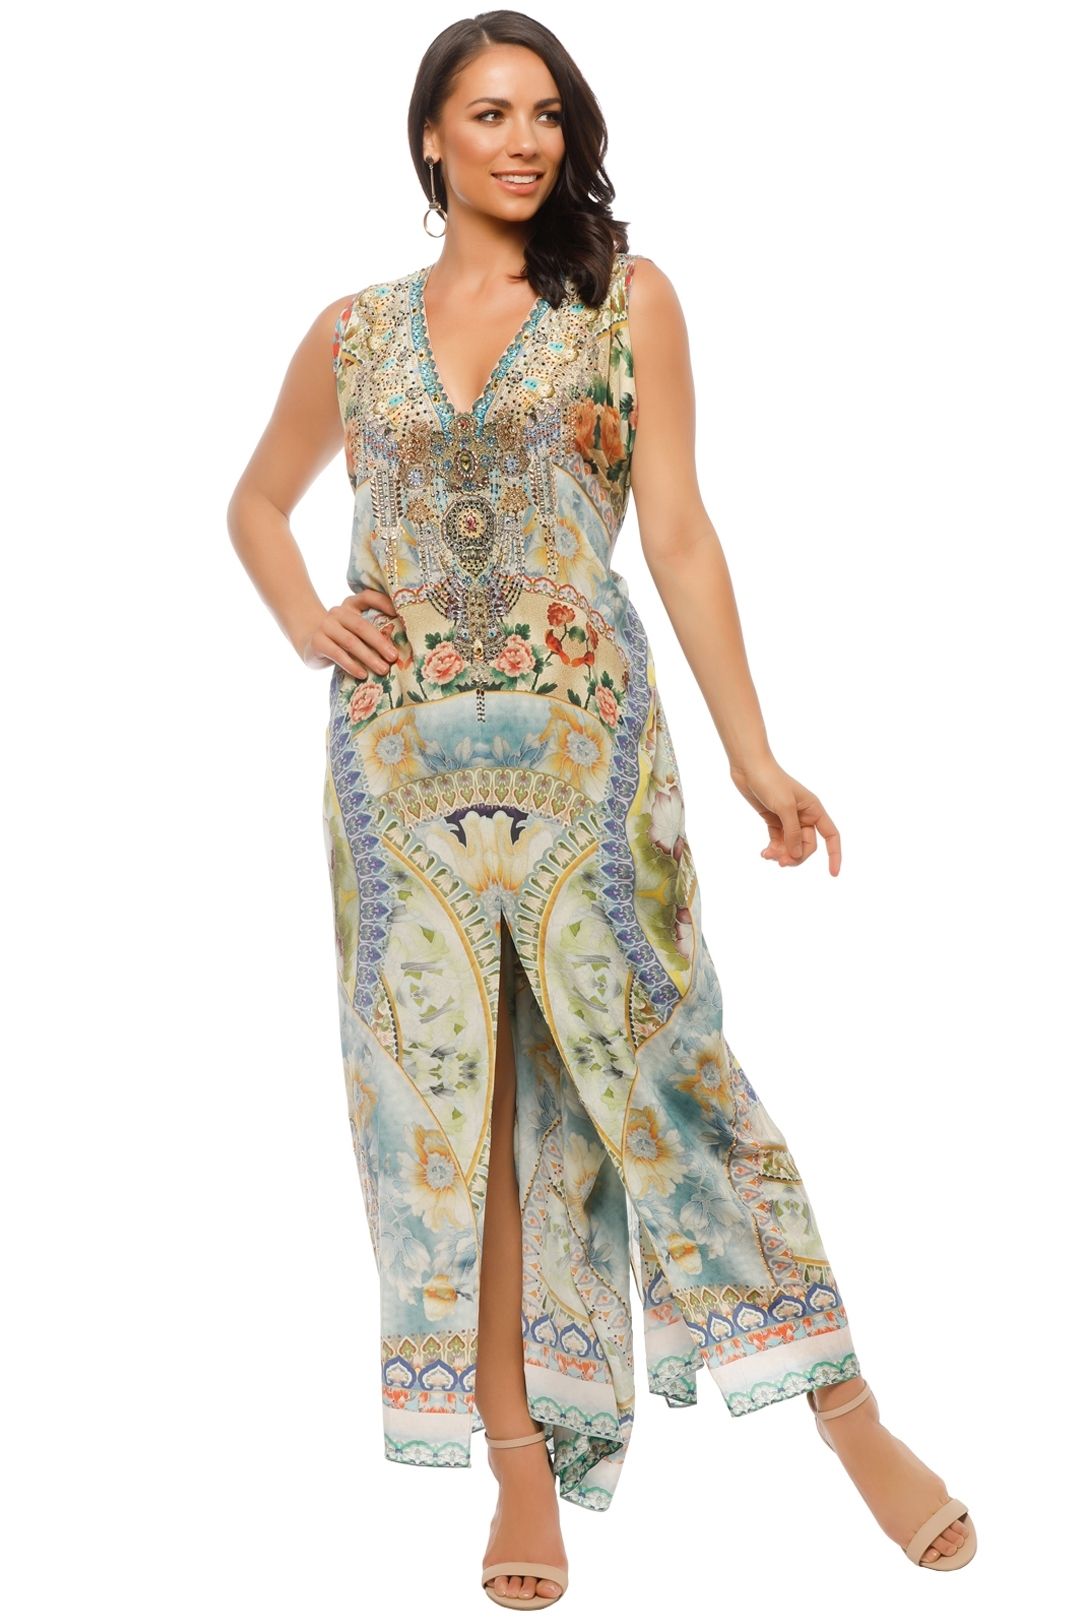 Camilla - Sign of Peace Split Front Sleeve Kaftan - Prints - Front Style 